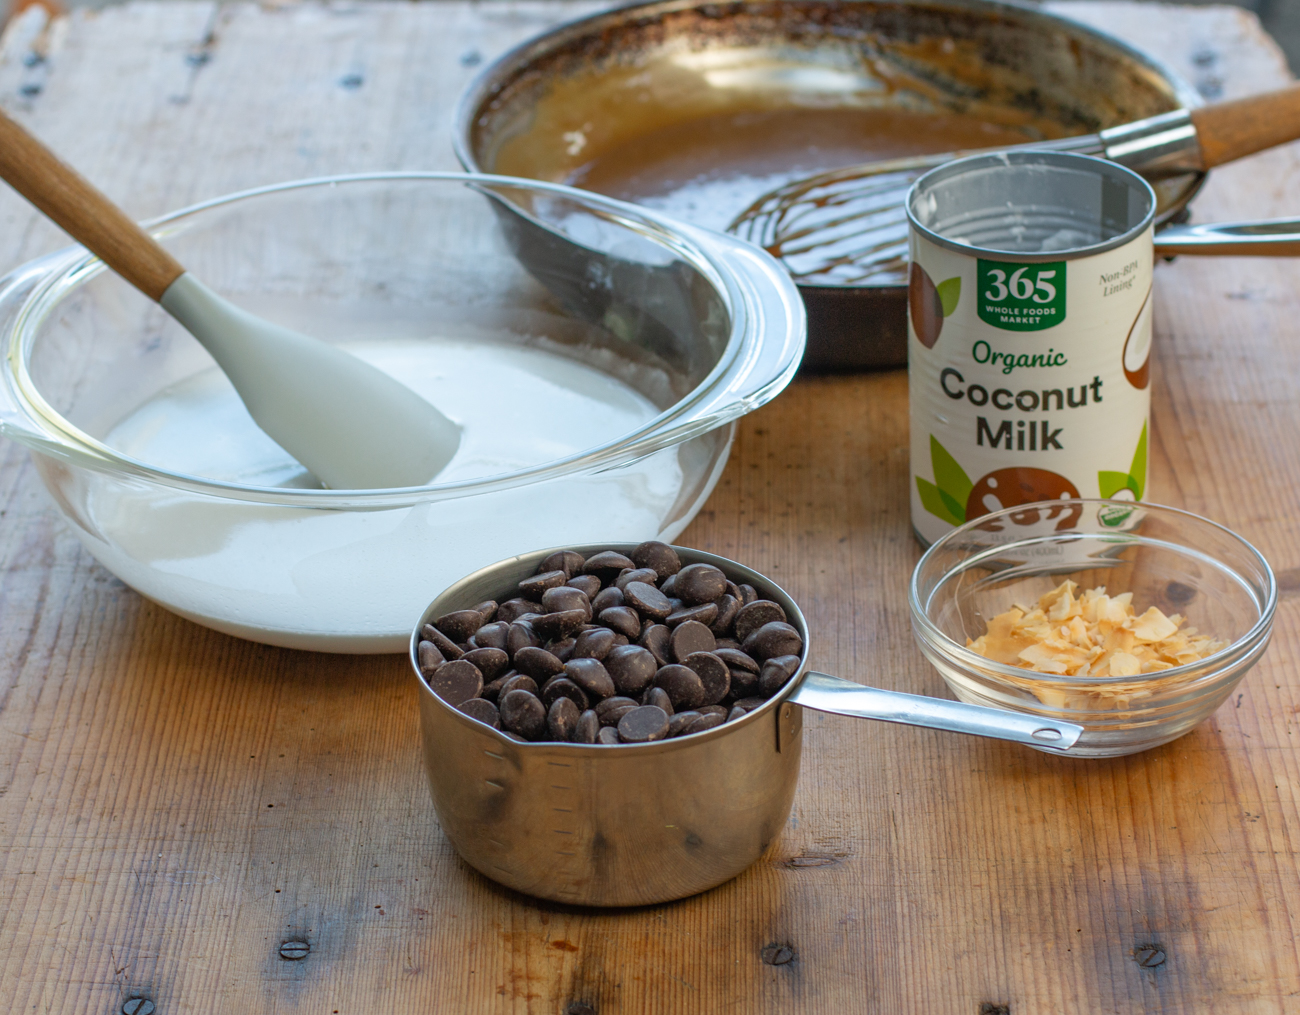 Ingredients for the Chocolate-Caramel Pie with Granola Coconut Crust - Vegan